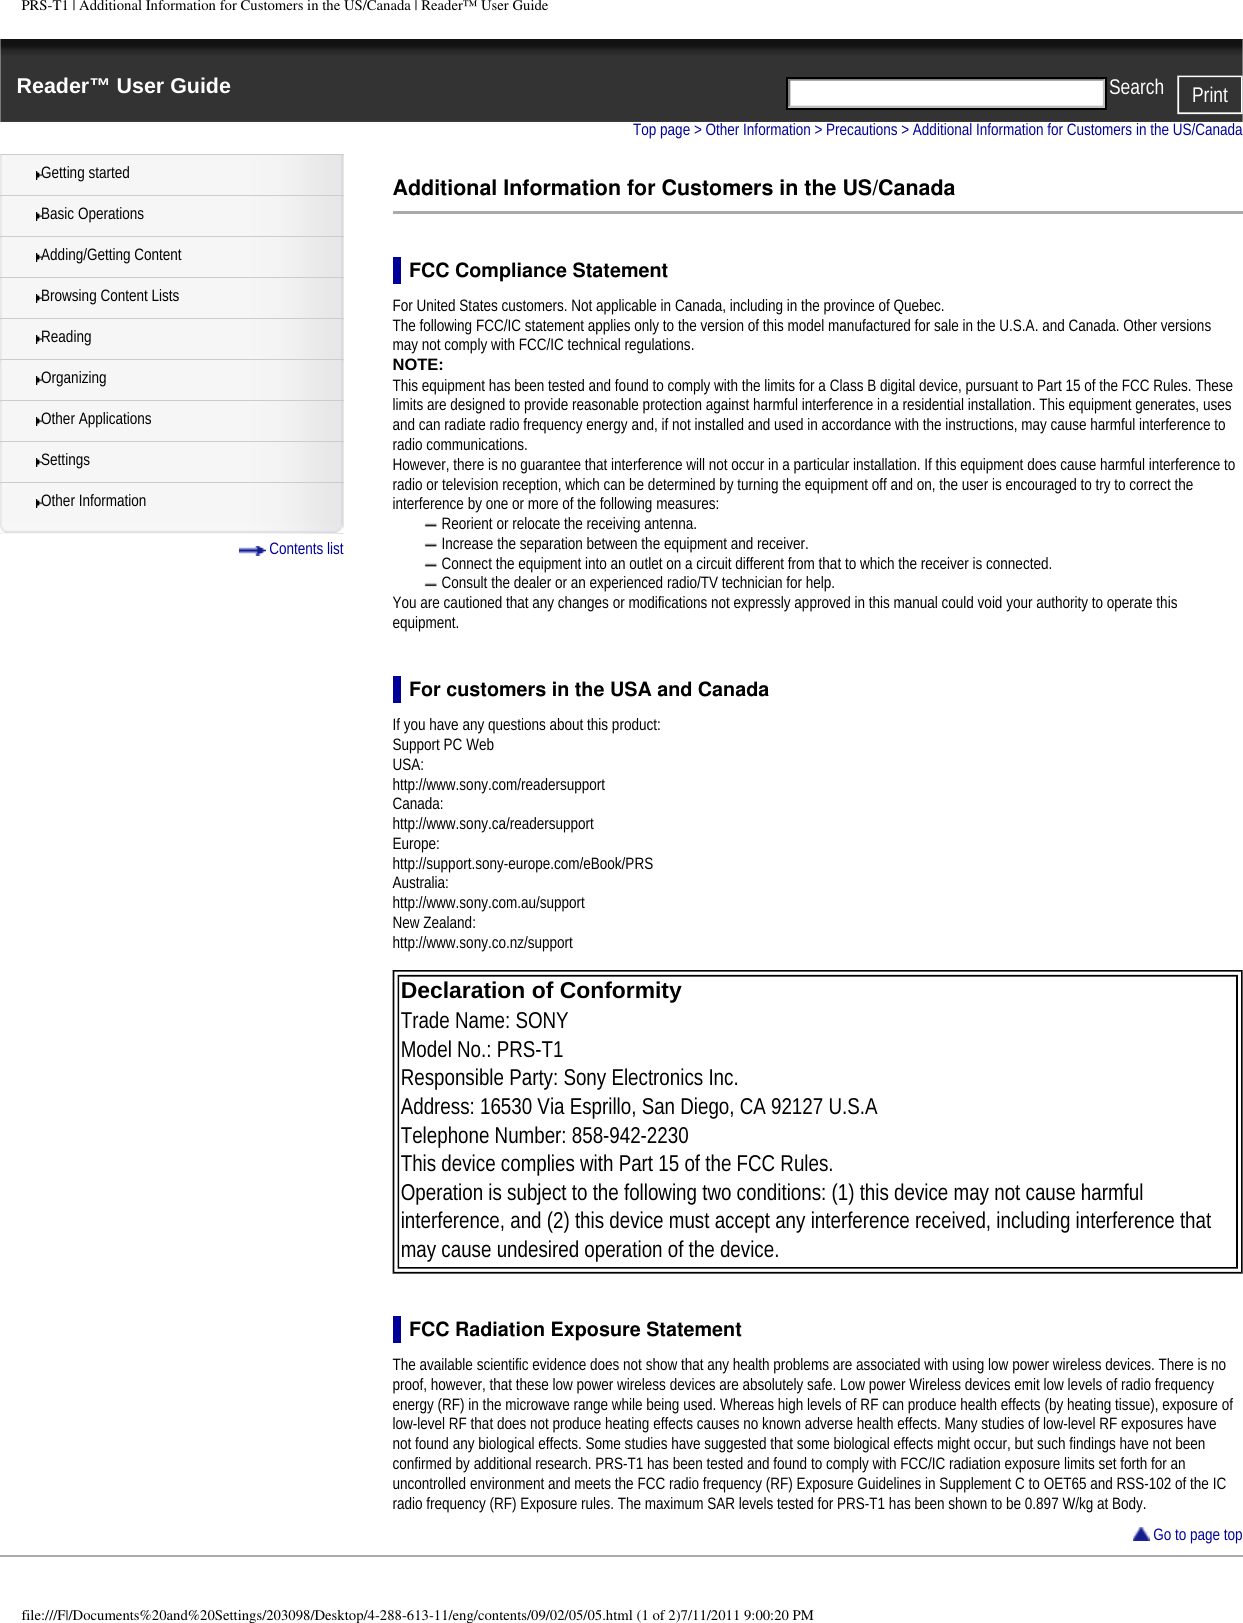 PRS-T1 | Additional Information for Customers in the US/Canada | Reader™ User GuideReader™ User Guide PrintSearch  Getting startedBasic OperationsAdding/Getting ContentBrowsing Content ListsReadingOrganizingOther ApplicationsSettingsOther Information Contents listTop page &gt; Other Information &gt; Precautions &gt; Additional Information for Customers in the US/CanadaAdditional Information for Customers in the US/CanadaFCC Compliance StatementFor United States customers. Not applicable in Canada, including in the province of Quebec.The following FCC/IC statement applies only to the version of this model manufactured for sale in the U.S.A. and Canada. Other versions may not comply with FCC/IC technical regulations.NOTE: This equipment has been tested and found to comply with the limits for a Class B digital device, pursuant to Part 15 of the FCC Rules. These limits are designed to provide reasonable protection against harmful interference in a residential installation. This equipment generates, uses and can radiate radio frequency energy and, if not installed and used in accordance with the instructions, may cause harmful interference to radio communications.However, there is no guarantee that interference will not occur in a particular installation. If this equipment does cause harmful interference to radio or television reception, which can be determined by turning the equipment off and on, the user is encouraged to try to correct the interference by one or more of the following measures:Reorient or relocate the receiving antenna.Increase the separation between the equipment and receiver.Connect the equipment into an outlet on a circuit different from that to which the receiver is connected.Consult the dealer or an experienced radio/TV technician for help.You are cautioned that any changes or modifications not expressly approved in this manual could void your authority to operate this equipment.For customers in the USA and CanadaIf you have any questions about this product:Support PC WebUSA:http://www.sony.com/readersupportCanada:http://www.sony.ca/readersupportEurope:http://support.sony-europe.com/eBook/PRSAustralia:http://www.sony.com.au/supportNew Zealand:http://www.sony.co.nz/support Declaration of Conformity Trade Name: SONYModel No.: PRS-T1Responsible Party: Sony Electronics Inc.Address: 16530 Via Esprillo, San Diego, CA 92127 U.S.ATelephone Number: 858-942-2230This device complies with Part 15 of the FCC Rules.Operation is subject to the following two conditions: (1) this device may not cause harmful interference, and (2) this device must accept any interference received, including interference that may cause undesired operation of the device. FCC Radiation Exposure StatementThe available scientific evidence does not show that any health problems are associated with using low power wireless devices. There is no proof, however, that these low power wireless devices are absolutely safe. Low power Wireless devices emit low levels of radio frequency energy (RF) in the microwave range while being used. Whereas high levels of RF can produce health effects (by heating tissue), exposure of low-level RF that does not produce heating effects causes no known adverse health effects. Many studies of low-level RF exposures have not found any biological effects. Some studies have suggested that some biological effects might occur, but such findings have not been confirmed by additional research. PRS-T1 has been tested and found to comply with FCC/IC radiation exposure limits set forth for an uncontrolled environment and meets the FCC radio frequency (RF) Exposure Guidelines in Supplement C to OET65 and RSS-102 of the IC radio frequency (RF) Exposure rules. The maximum SAR levels tested for PRS-T1 has been shown to be 0.897 W/kg at Body. Go to page topfile:///F|/Documents%20and%20Settings/203098/Desktop/4-288-613-11/eng/contents/09/02/05/05.html (1 of 2)7/11/2011 9:00:20 PM